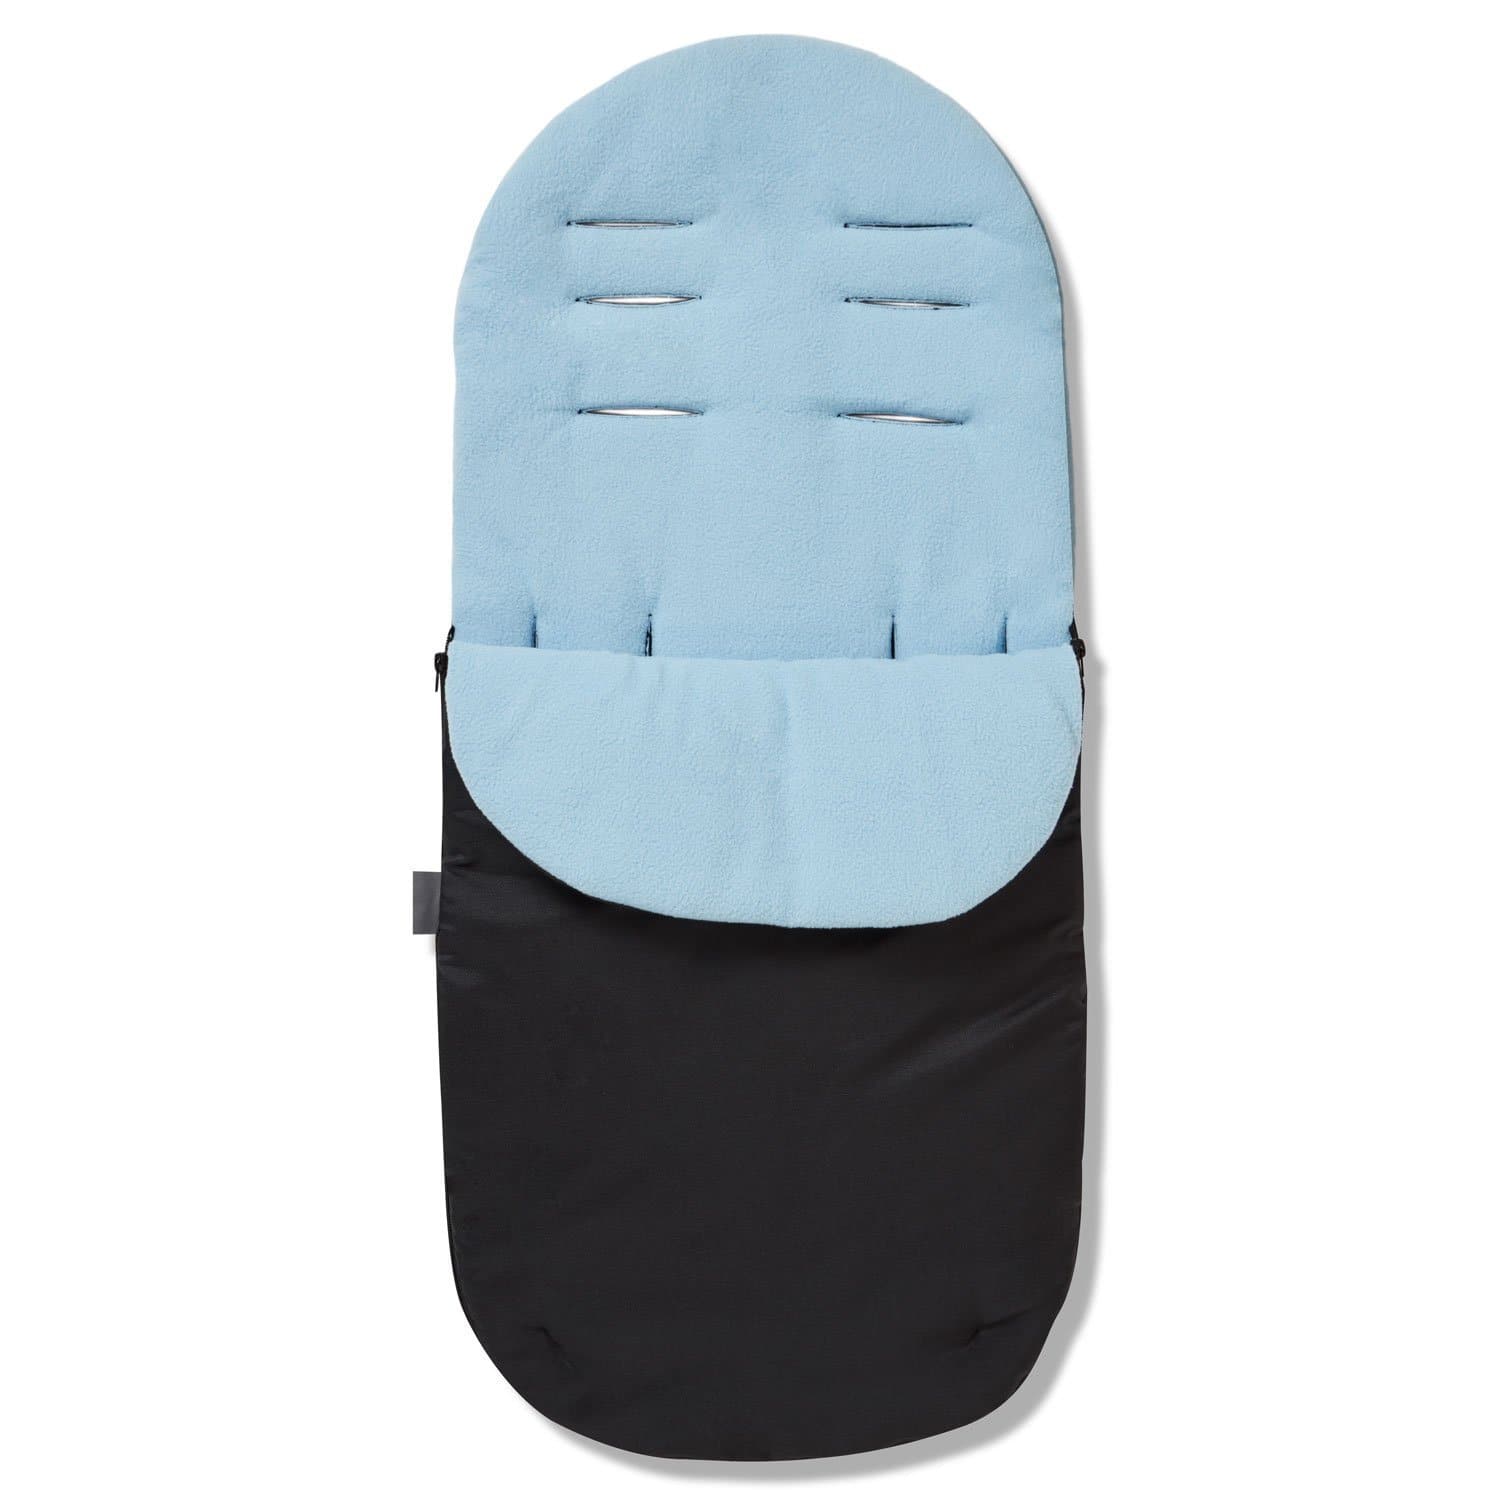 Footmuff / Cosy Toes Compatible with Peg Perego - Light Blue / Fits All Models | For Your Little One